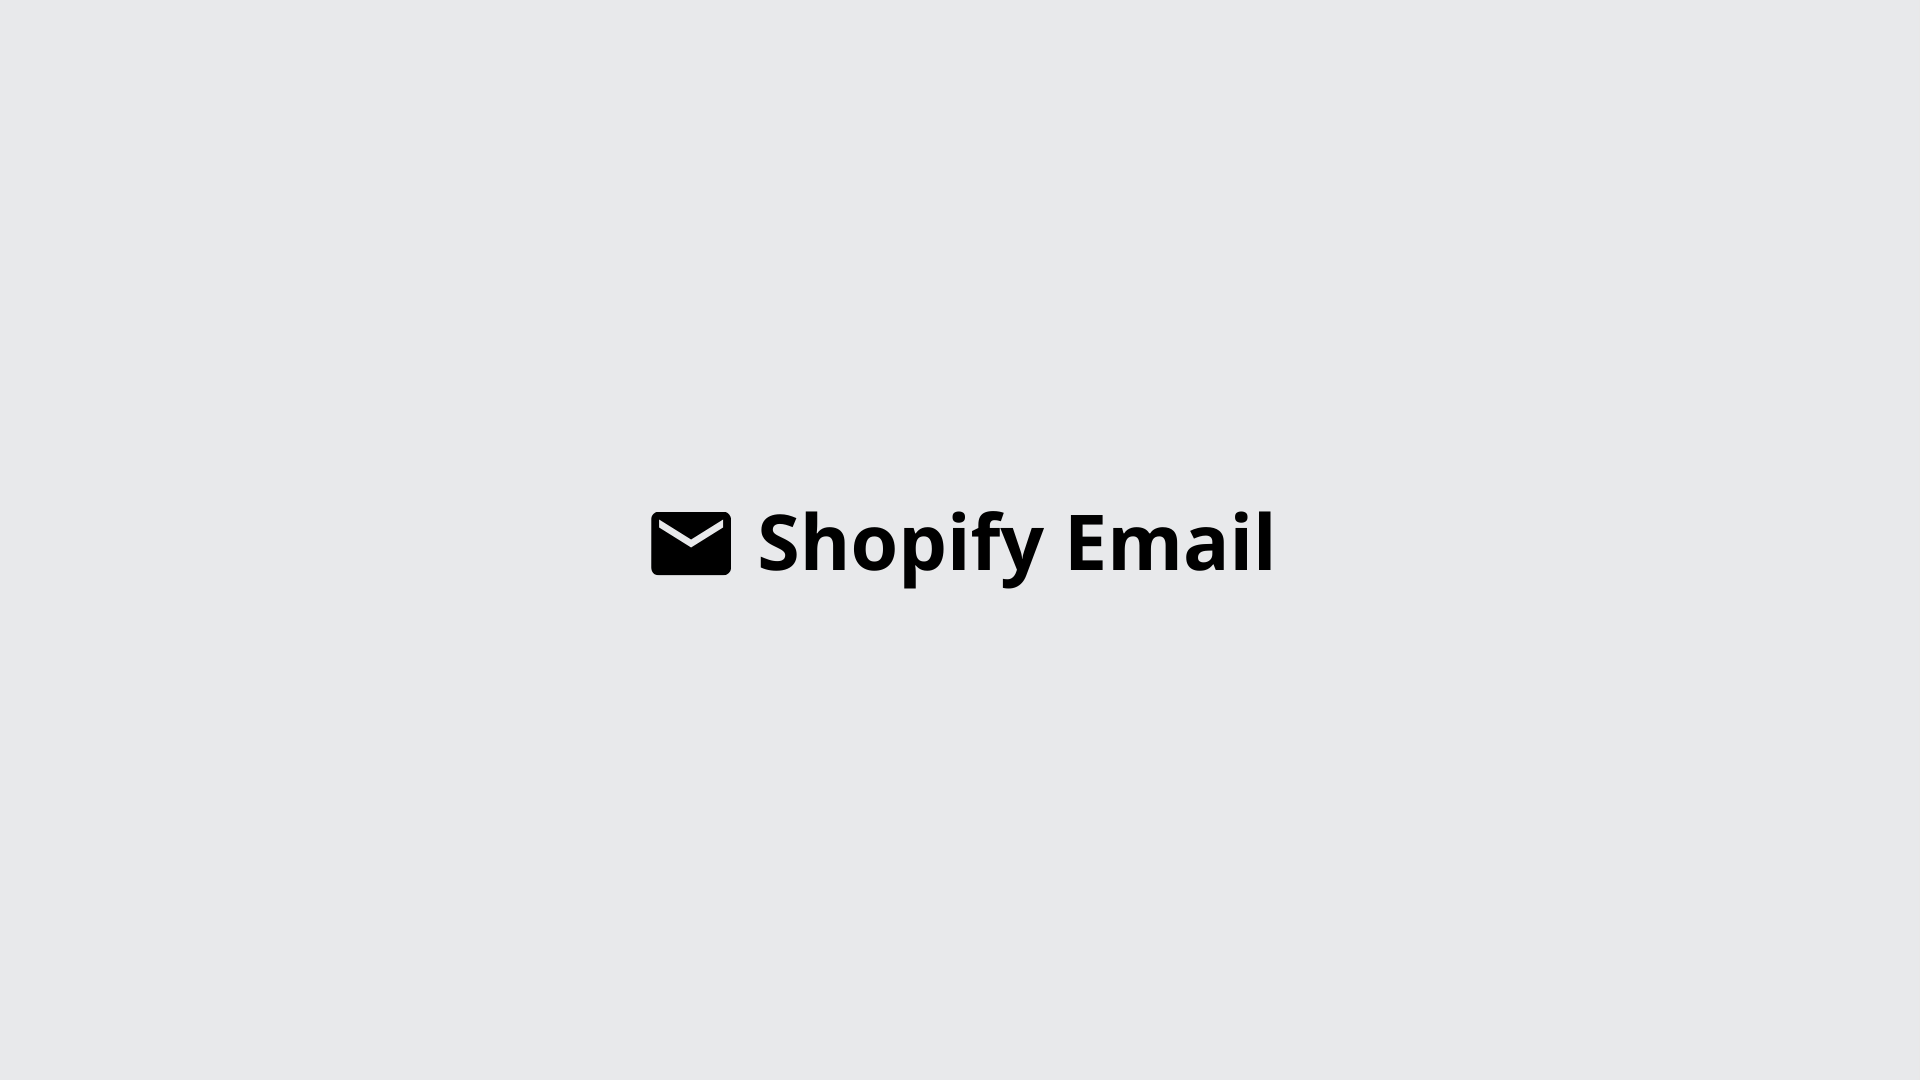 Email marketing on Shopify stores